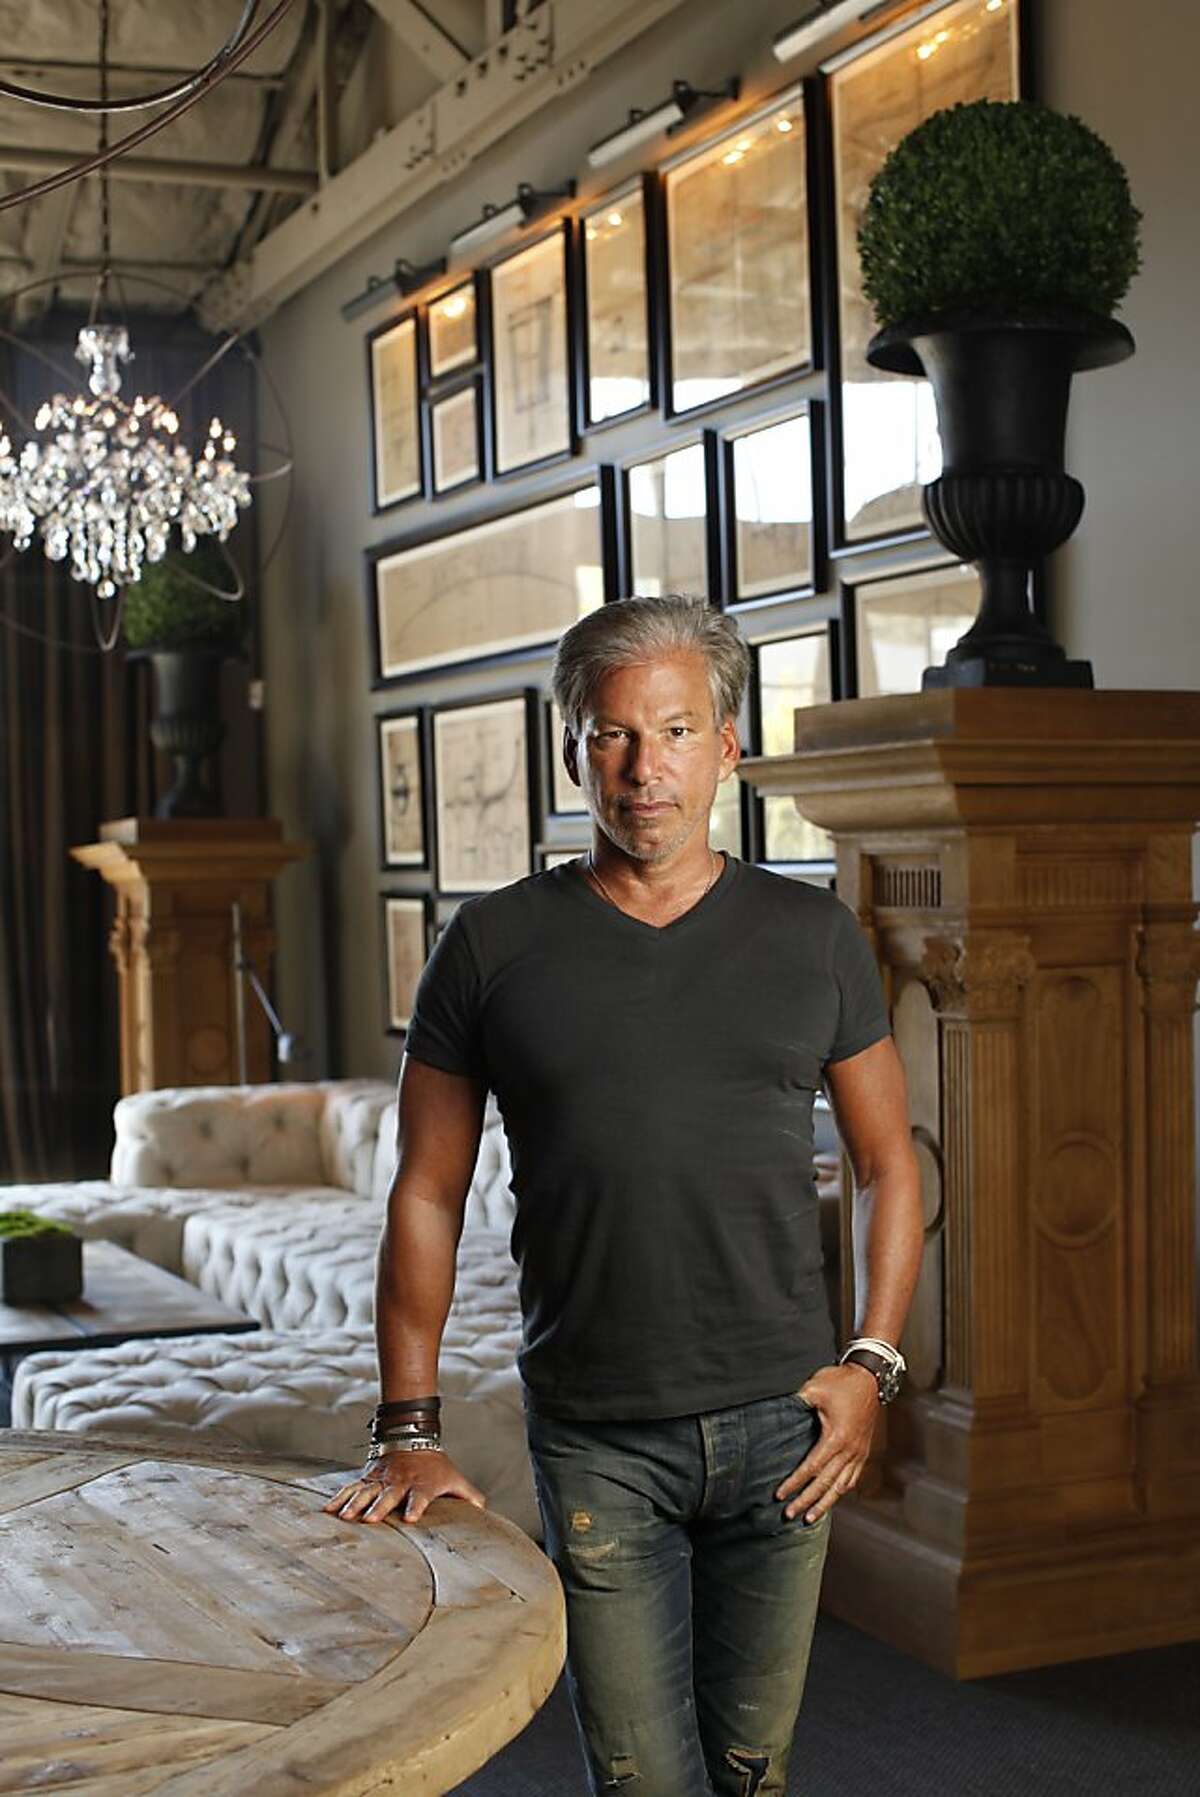 Gary Friedman, Chairman, Creator, Curator and Co-Chief Executive Officer of Restoration Hardware, is seen at the Restoration Hardware Headquarters Ð The Center of Innovation and Product Leadership in Corte Madera, Calif., on Friday, Oct. 18, 2013.